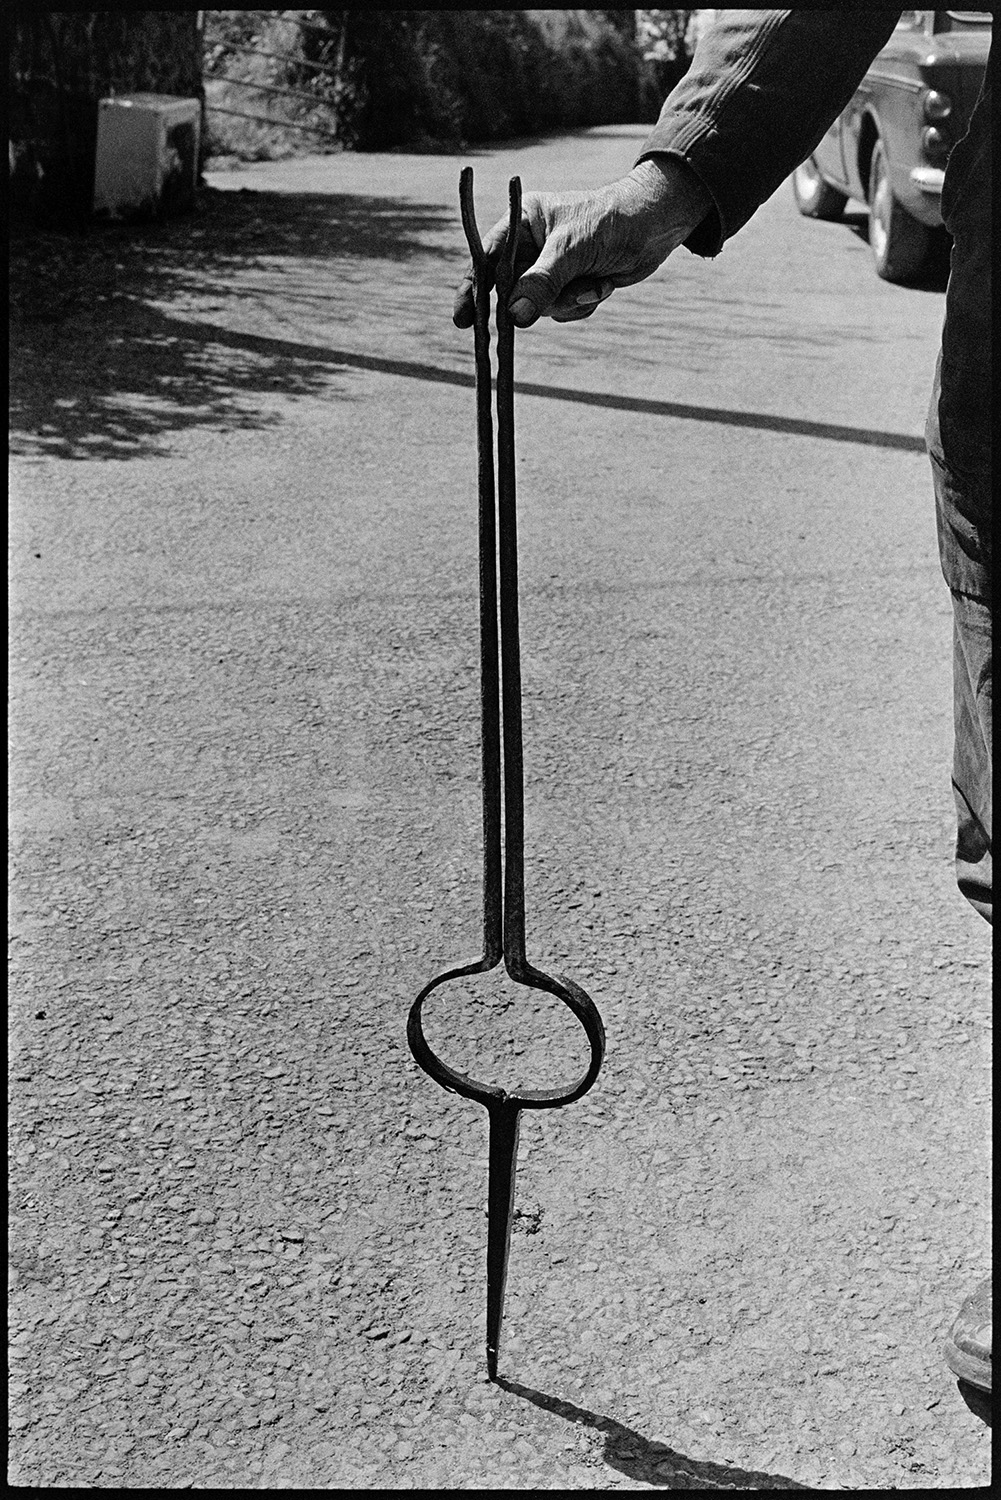 Rod stripper. 
[A metal rod used for stripping willow. It is being held by either Bill Cooke or Bill Folland at Colehouse, Riddlecombe.]